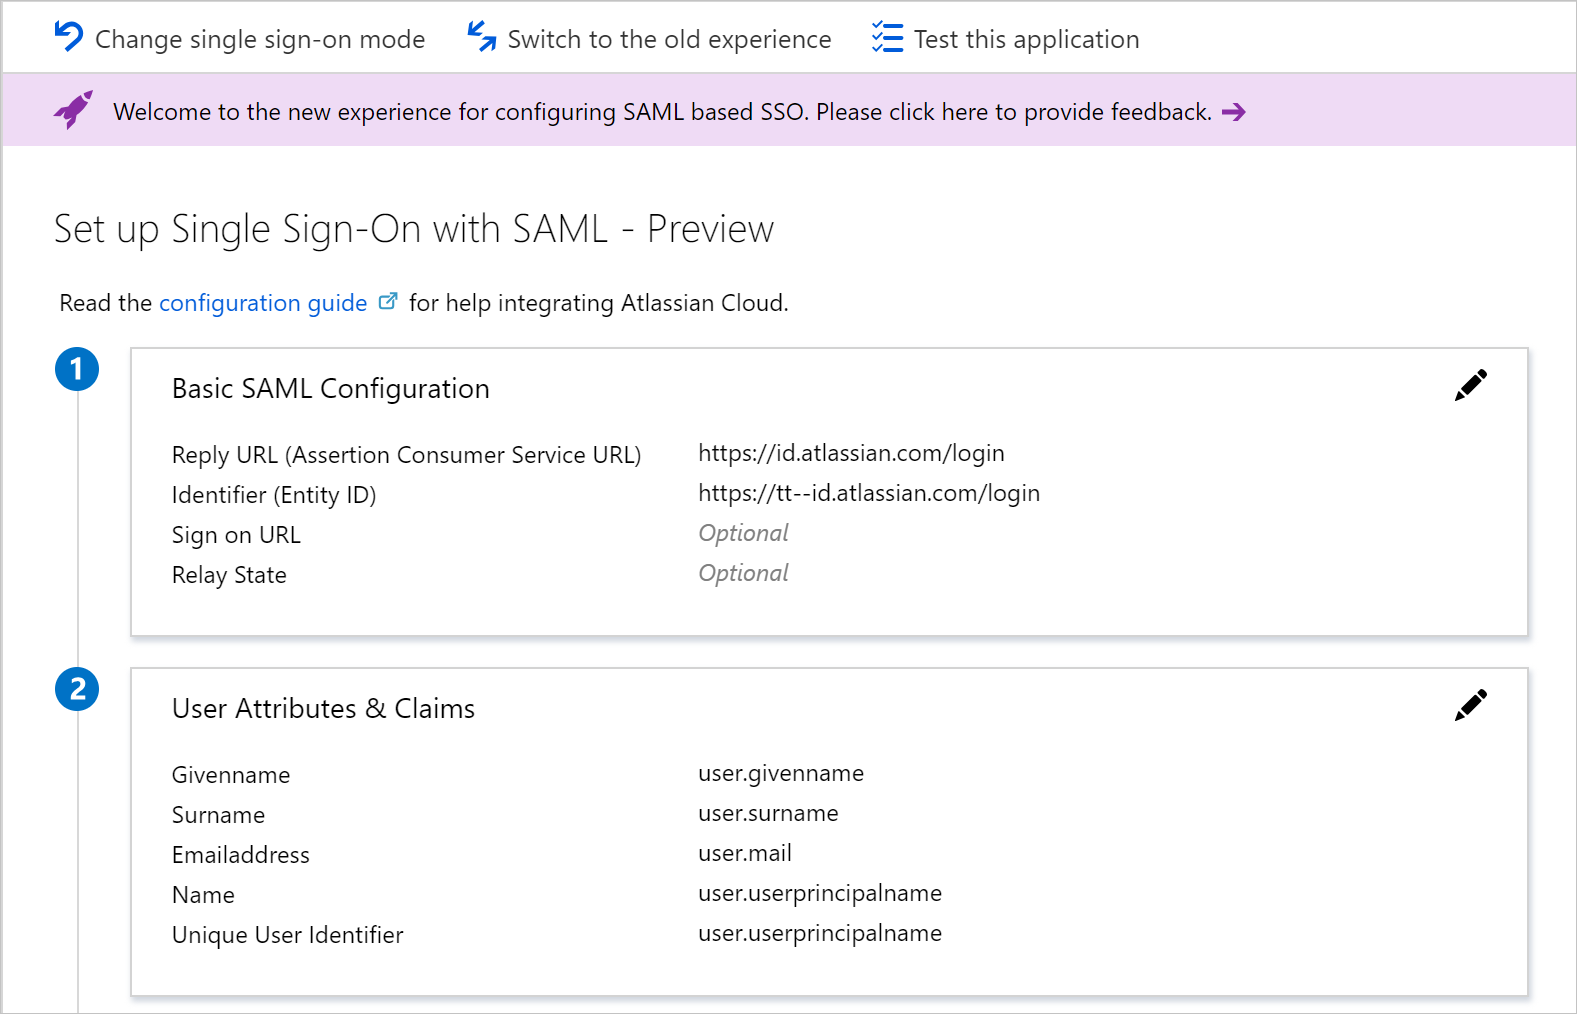 Screenshot of opening the Attributes & Claims section in the Azure portal.